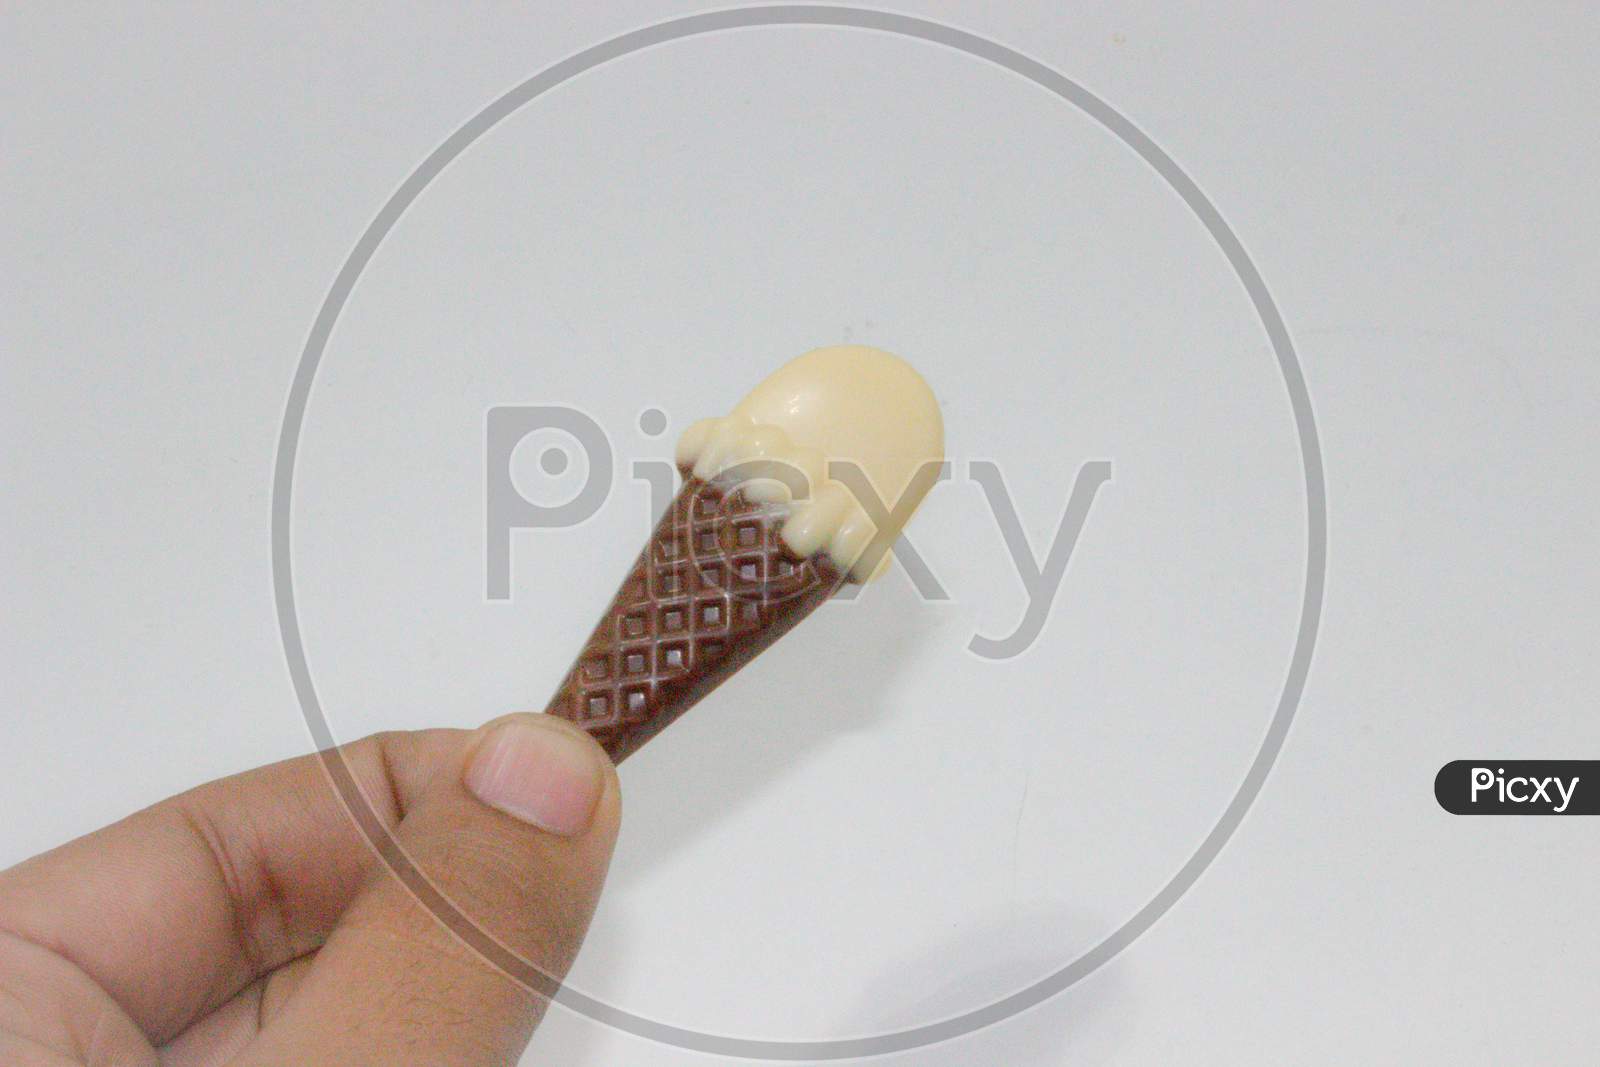 A picture of cone chocolate